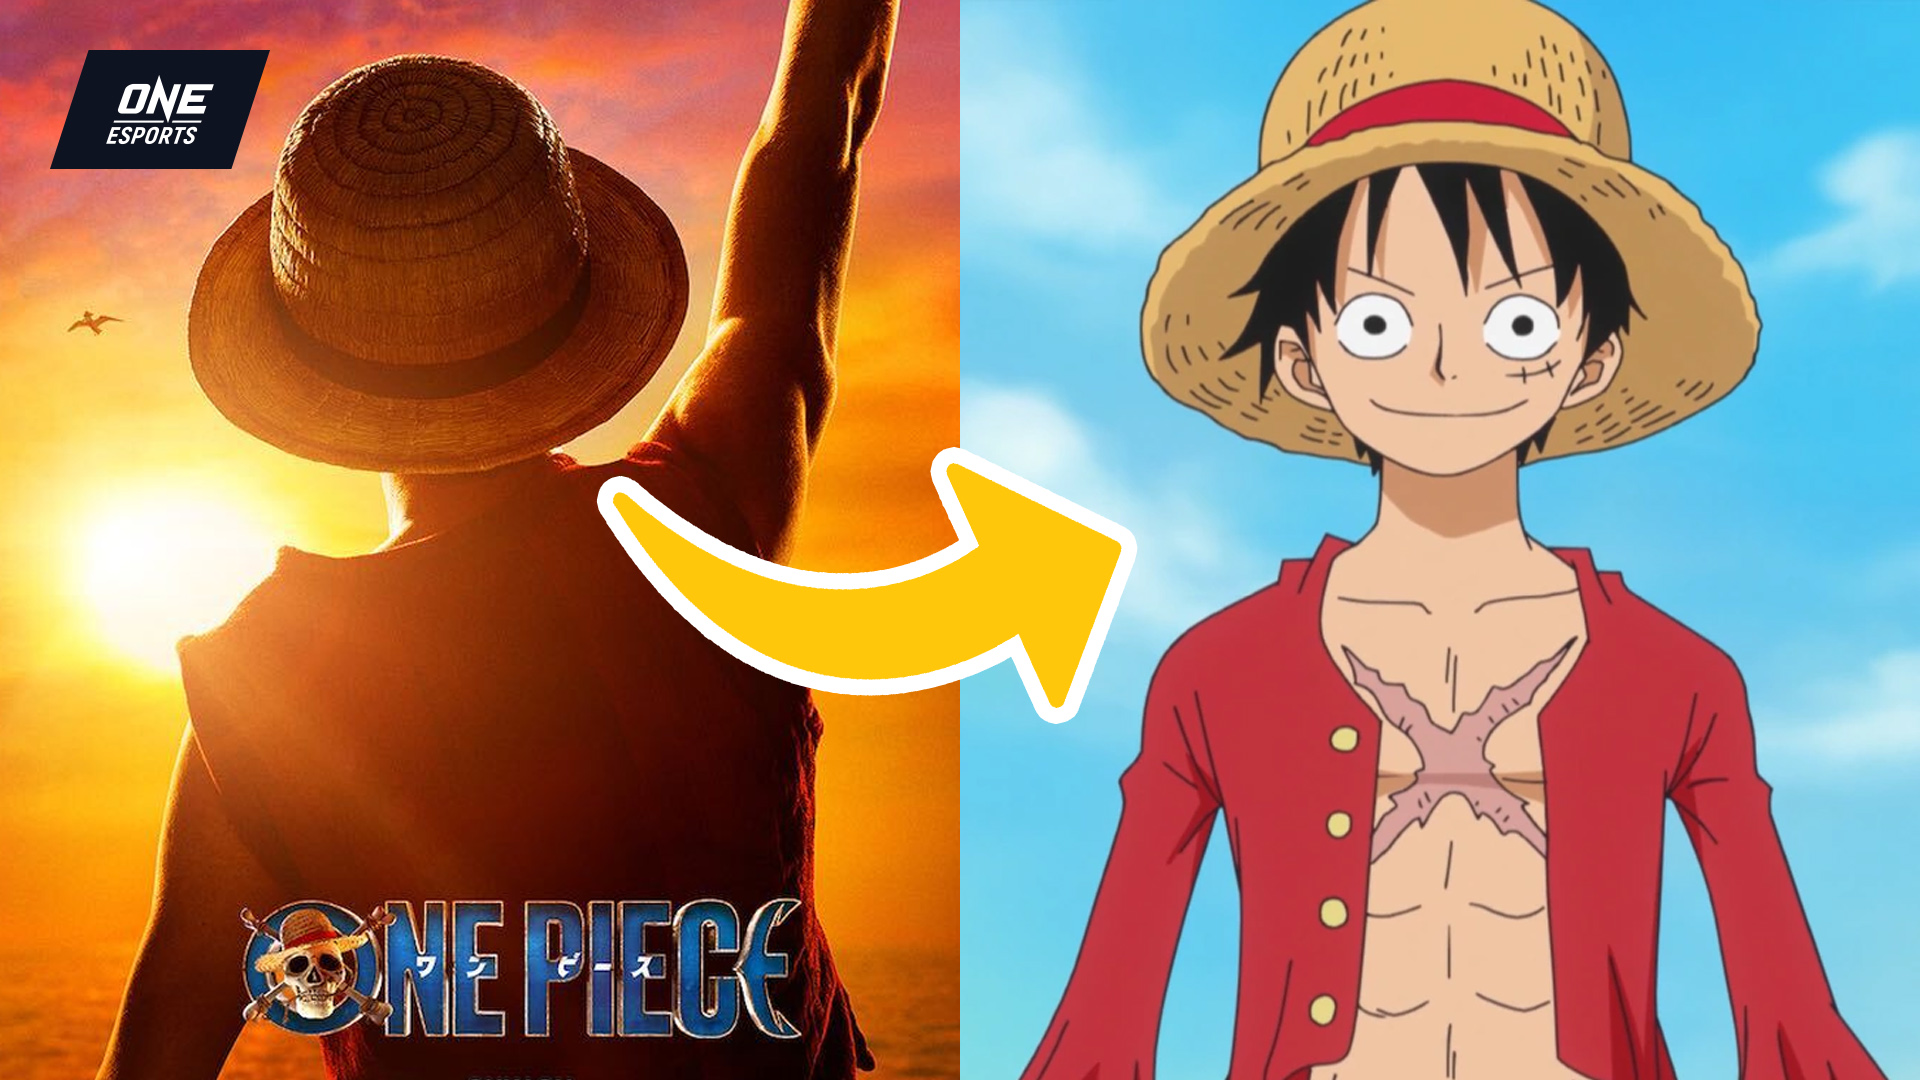 How To Add One Piece Live Action Show To Your Netflix List | One Esports